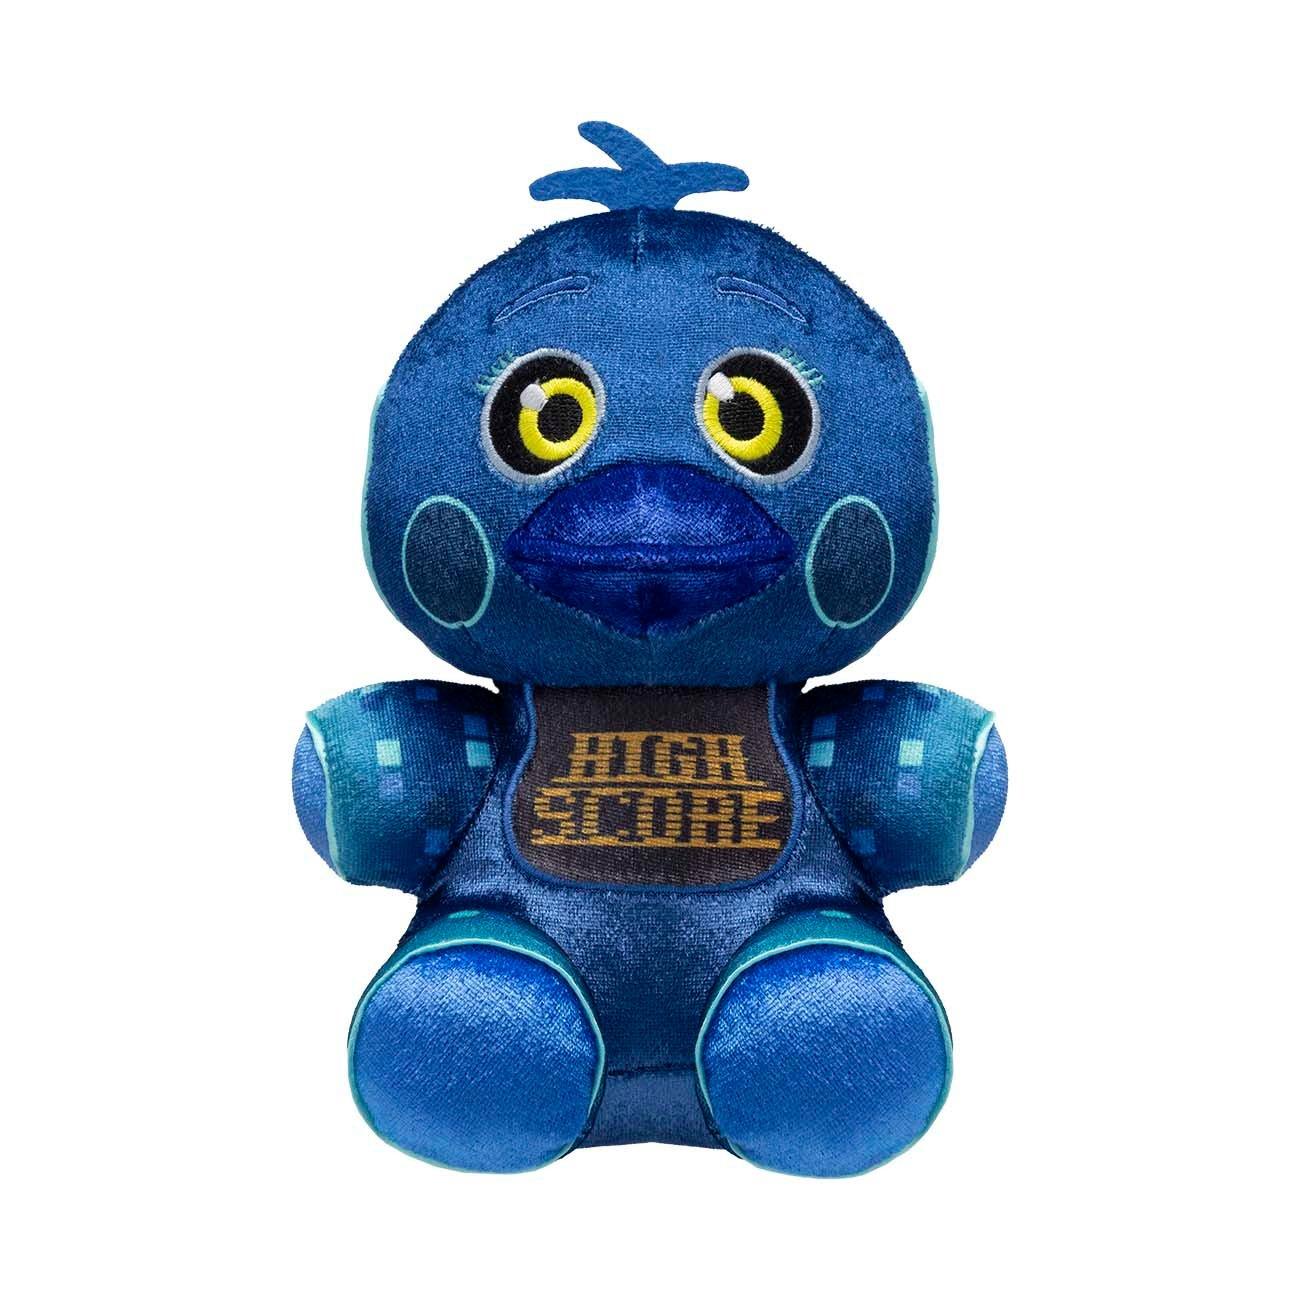 Funko Five Nights At Freddy's: Special Delivery High Score Chica